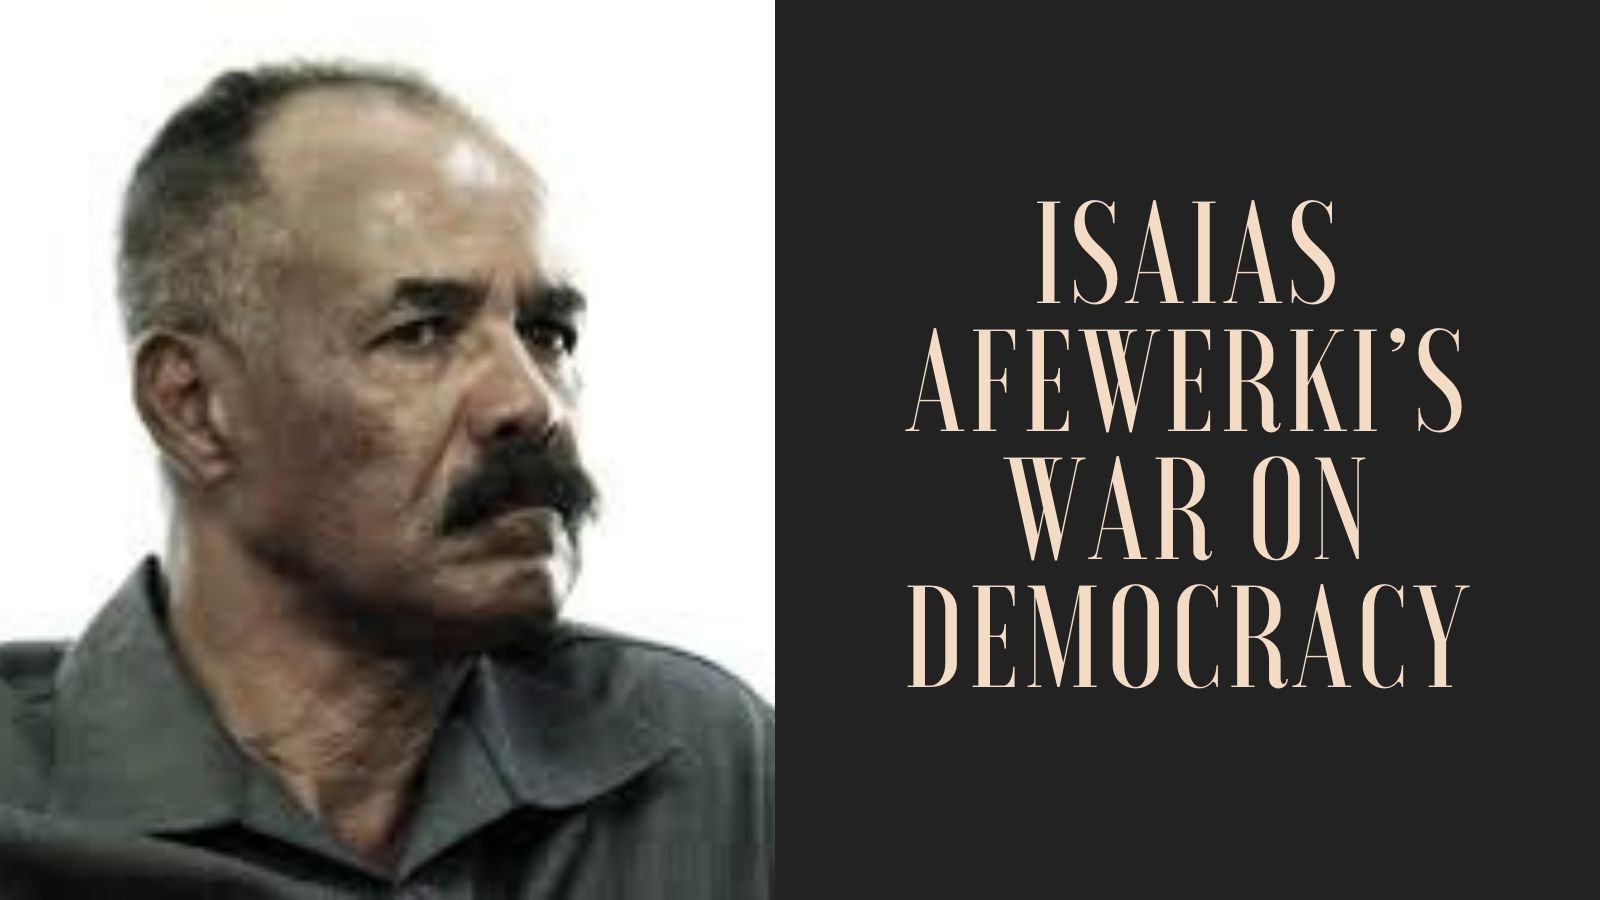 The War on Tigray as an Extension of Isaias Afewerki’s War on Democracy